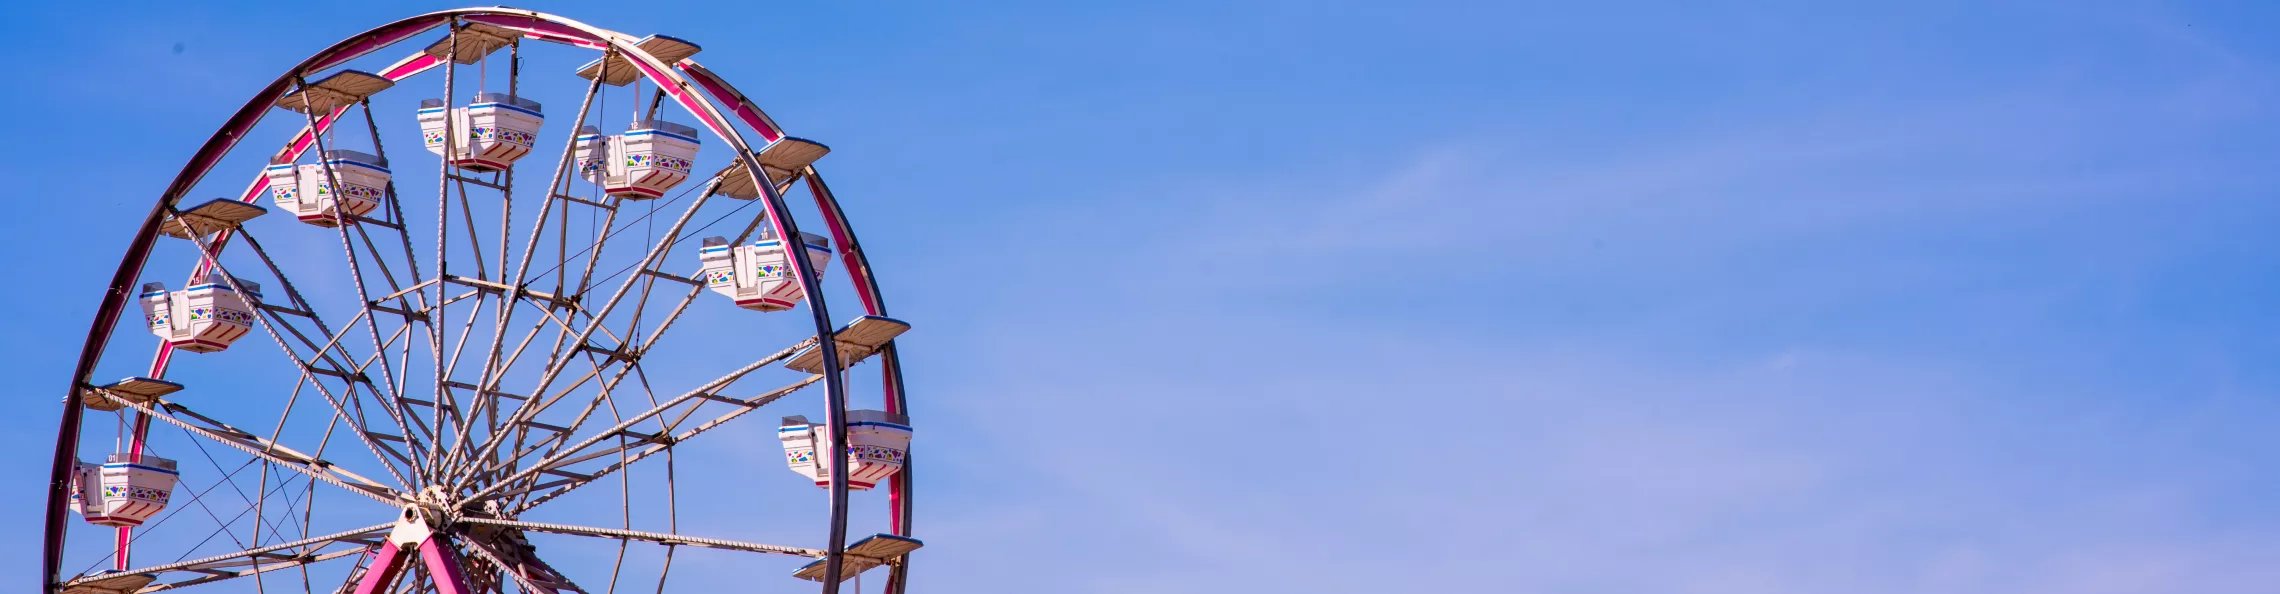 A ferris wheel shot from below with a blue sky behind